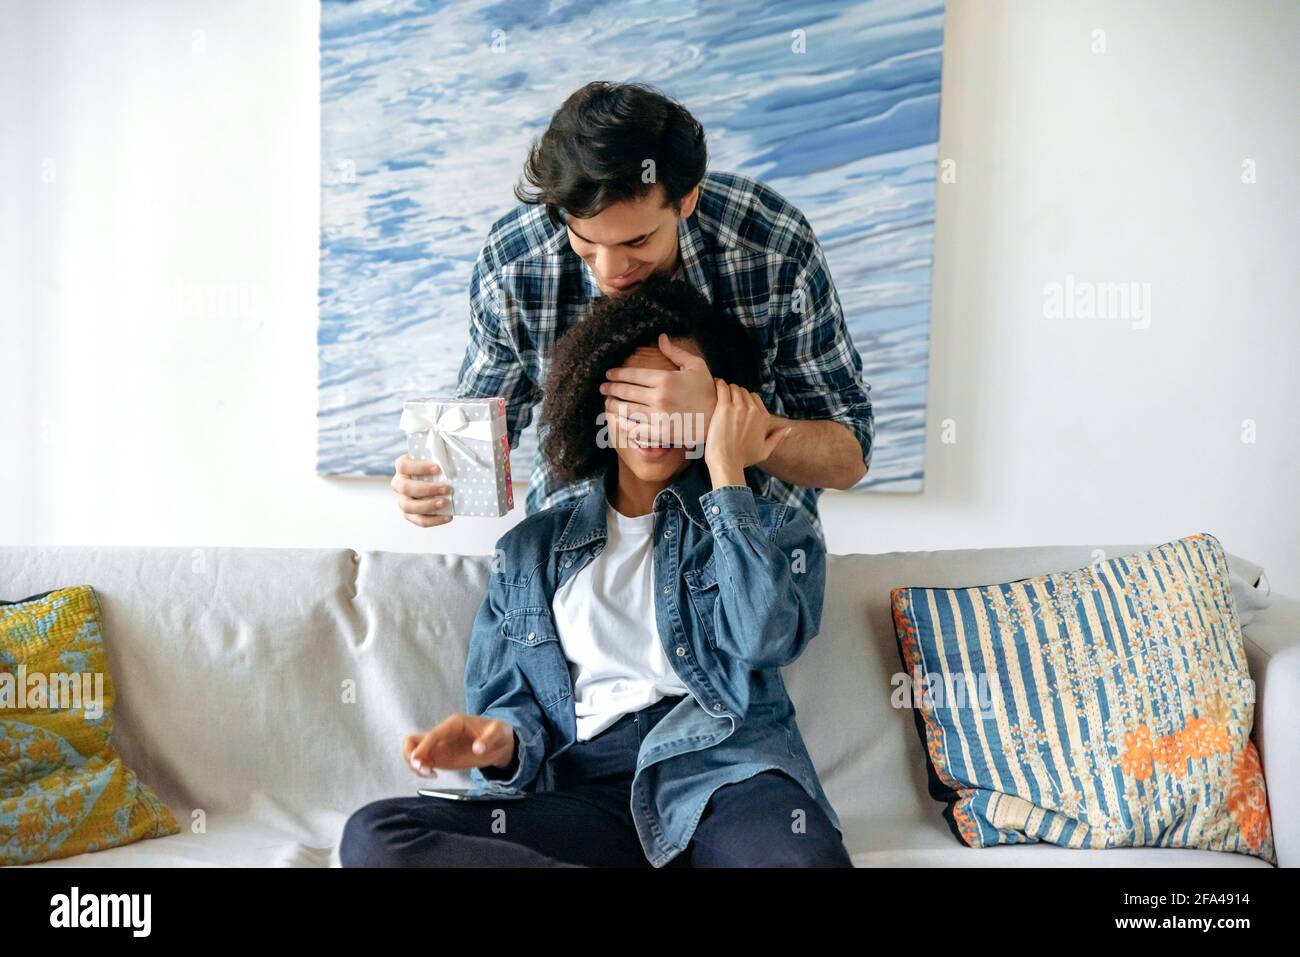 Romantic relationship of young couple. Attentive, loving caring guy in casual wear, covering eyes to girlfriend with his hand, getting ready to give her an relationship anniversary or birthday gift Stock Photo